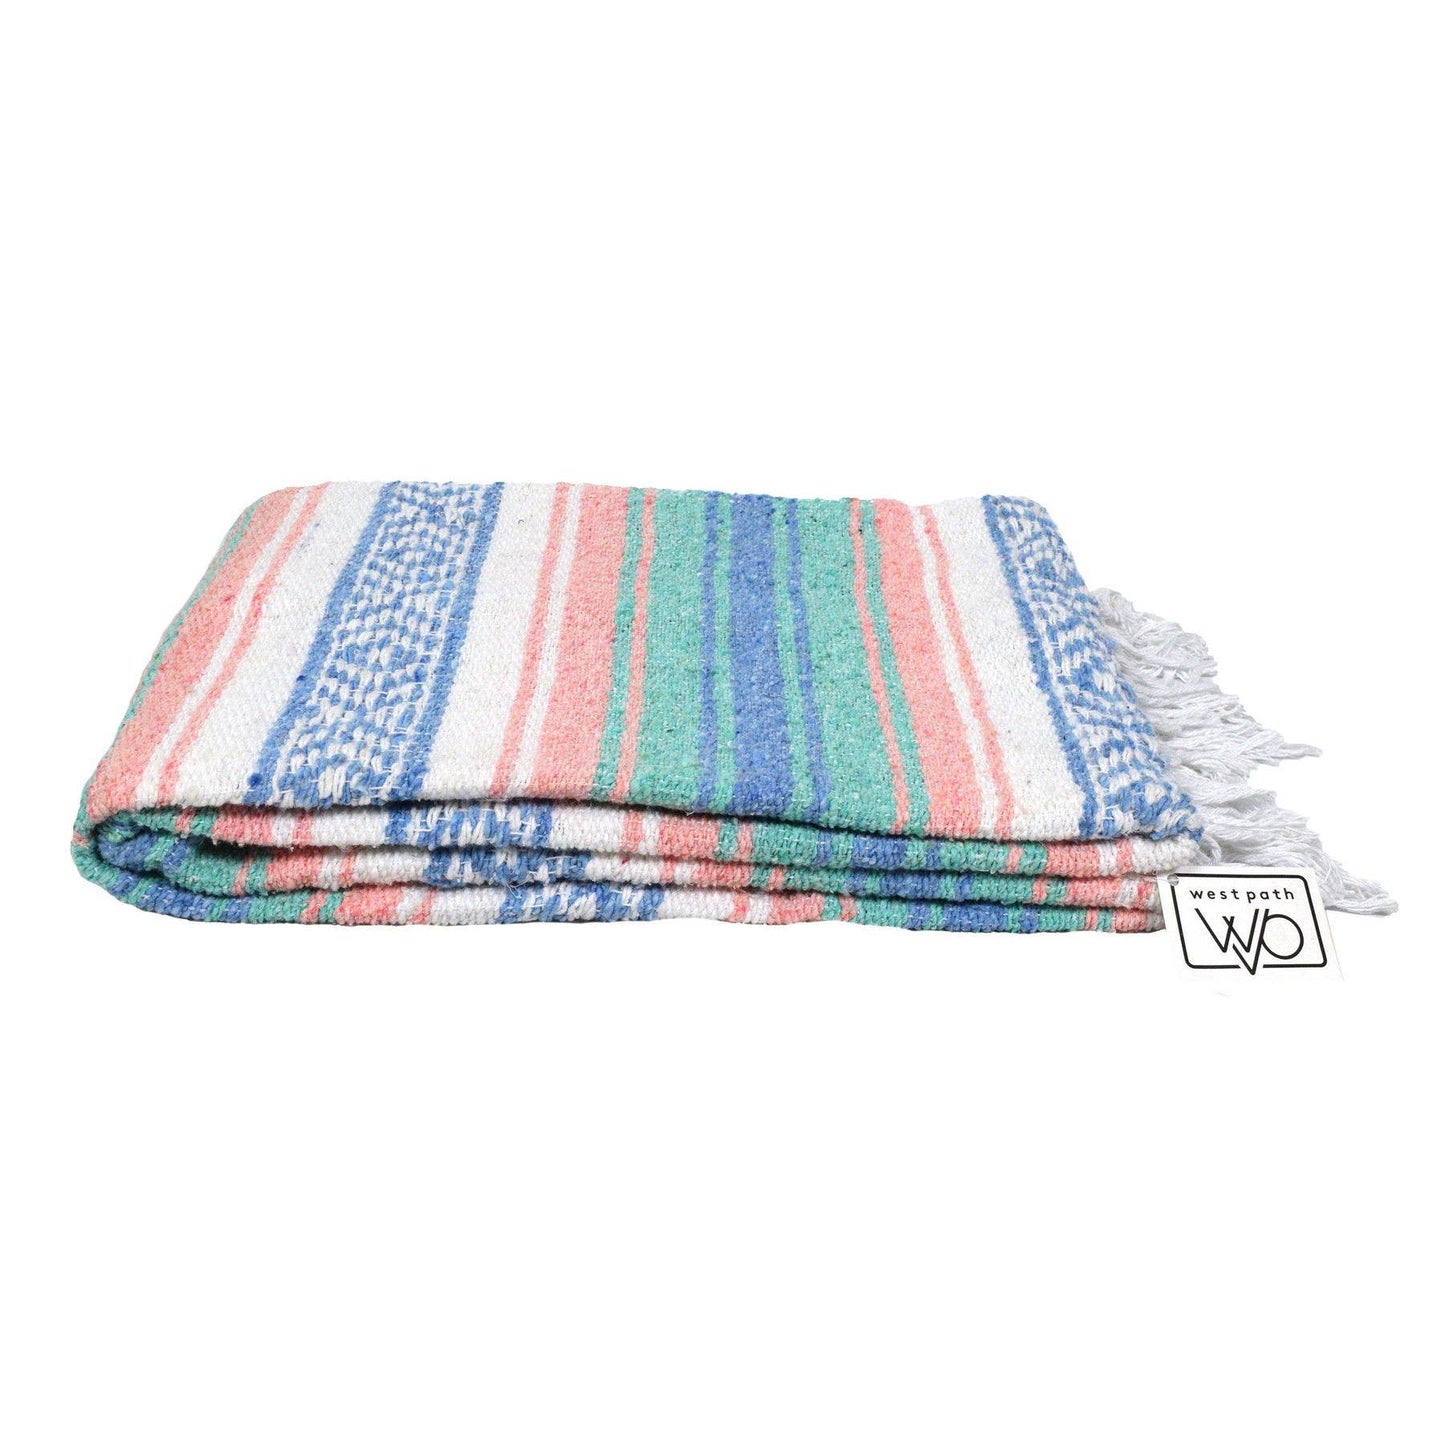 Westpath Mexican Falsa Blanket in mint, blue and peach